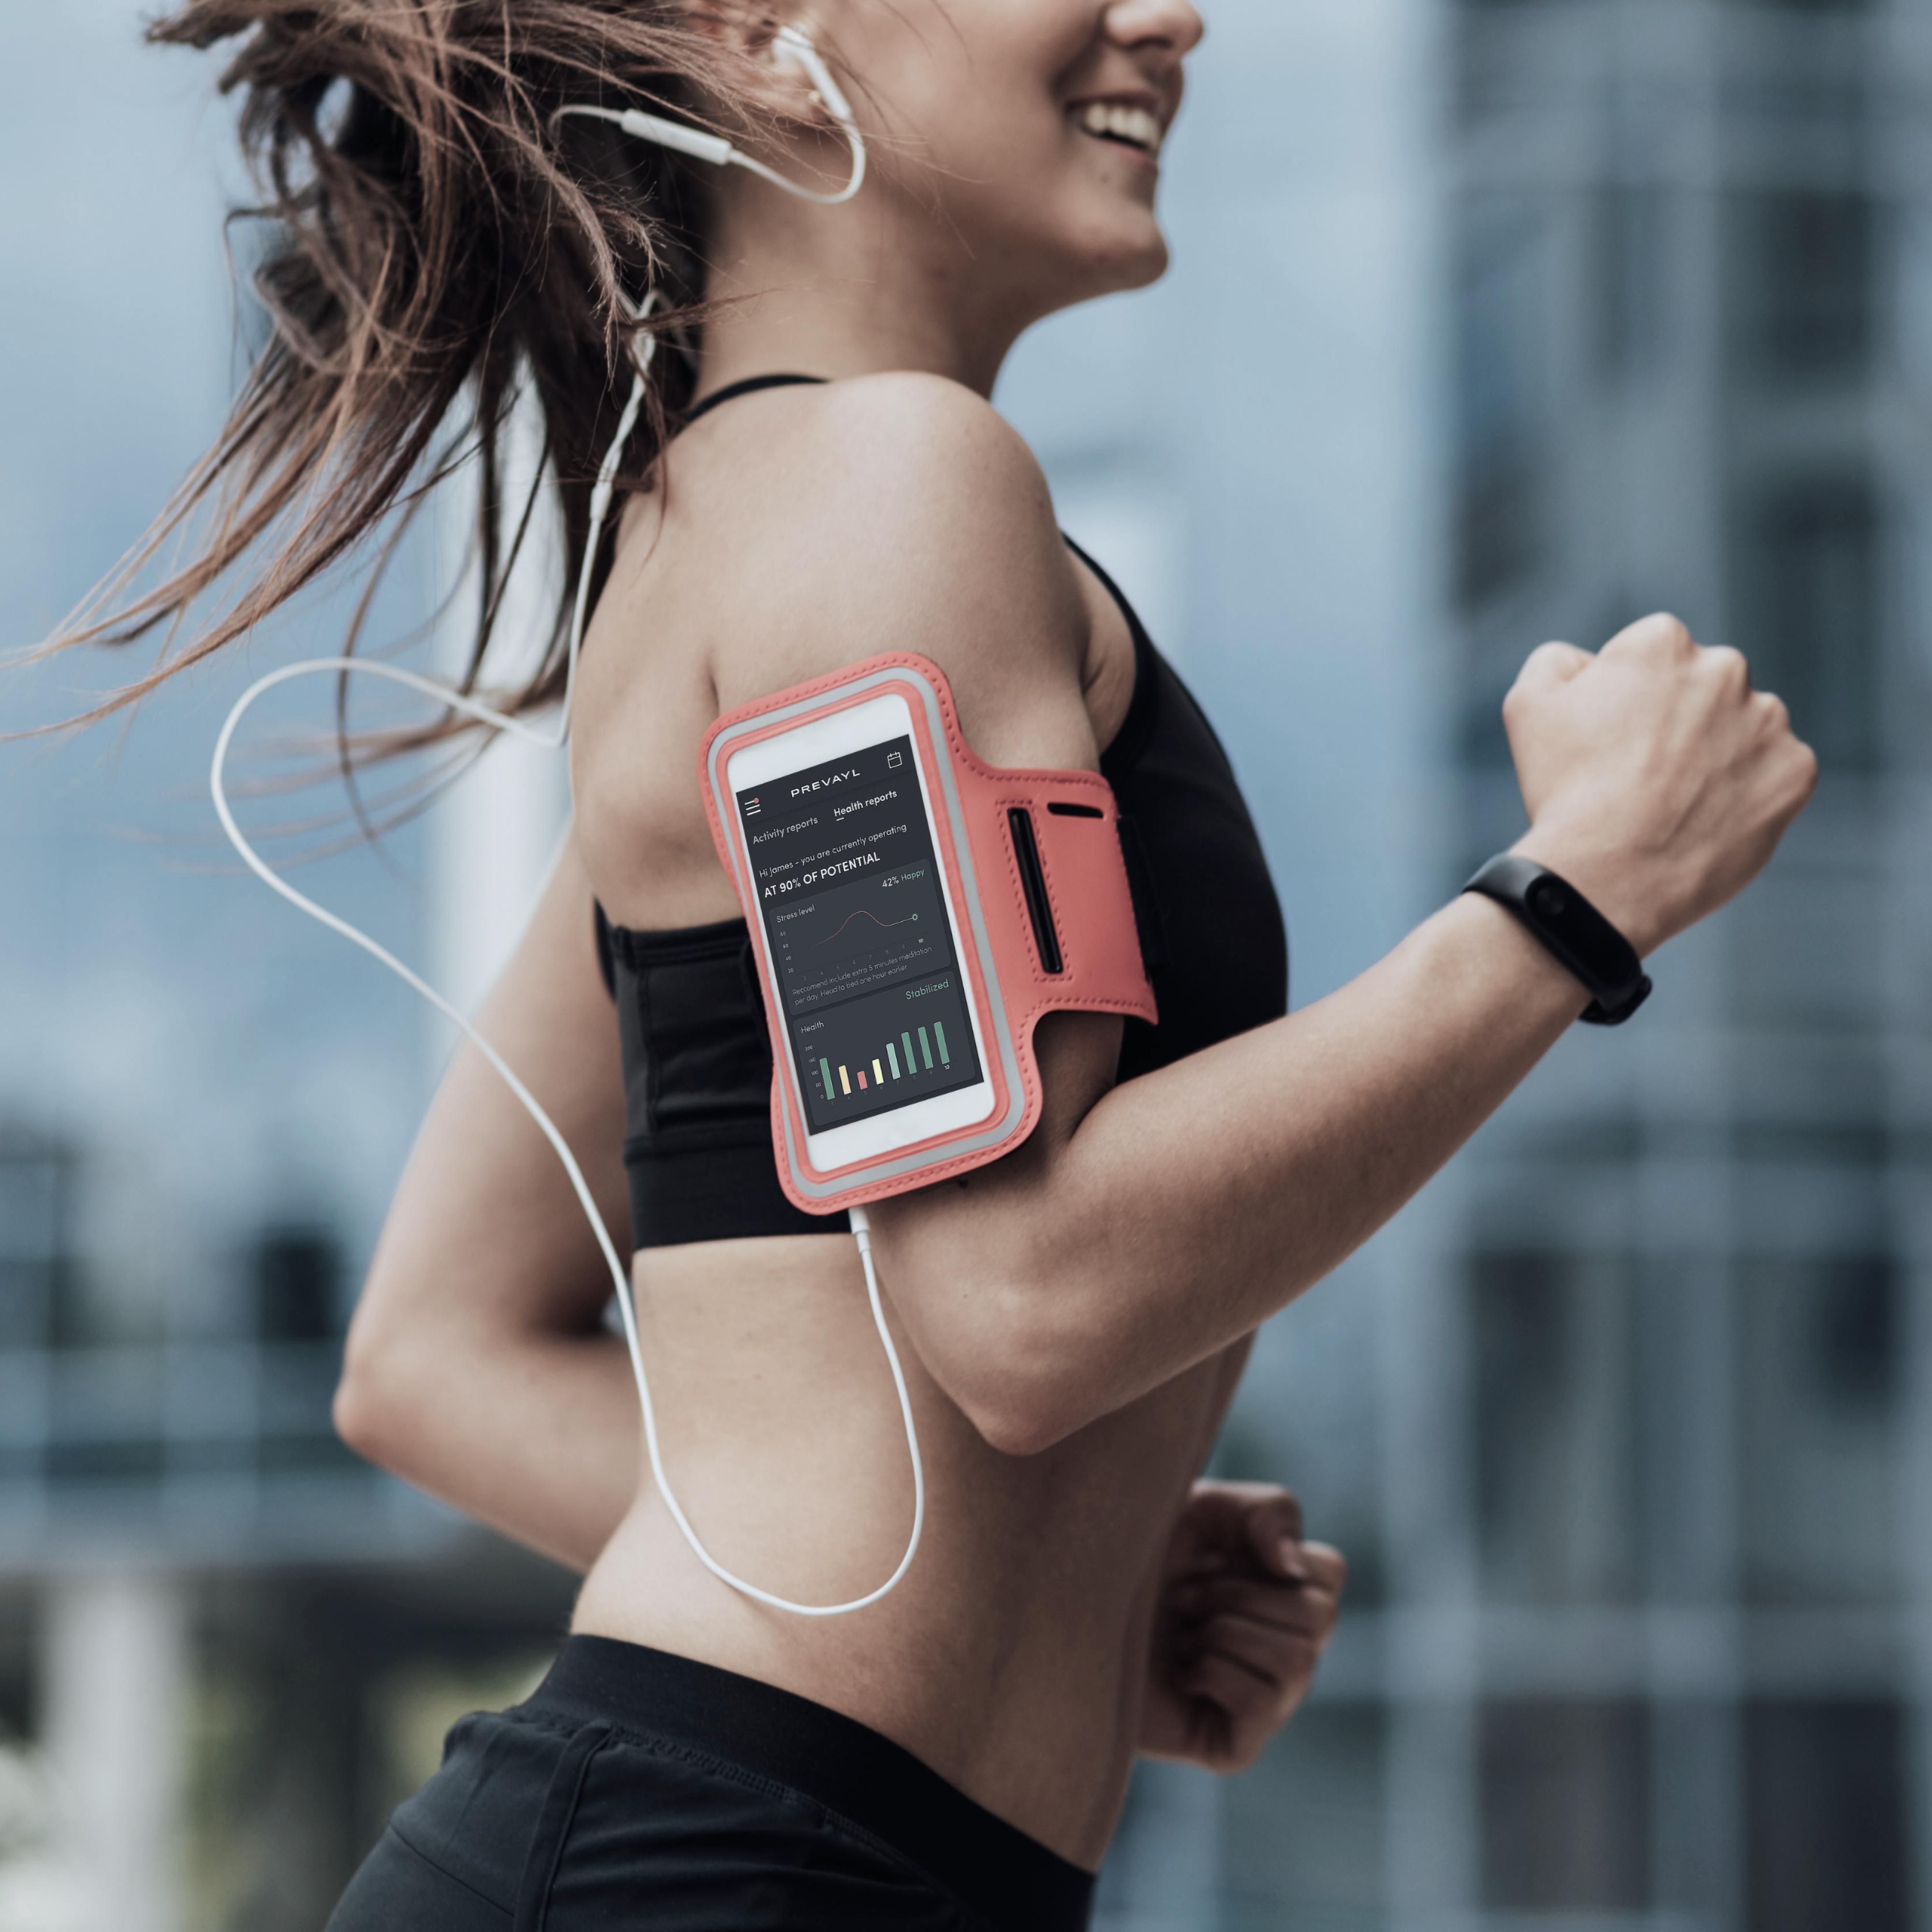 Mobile apps for wearable devices